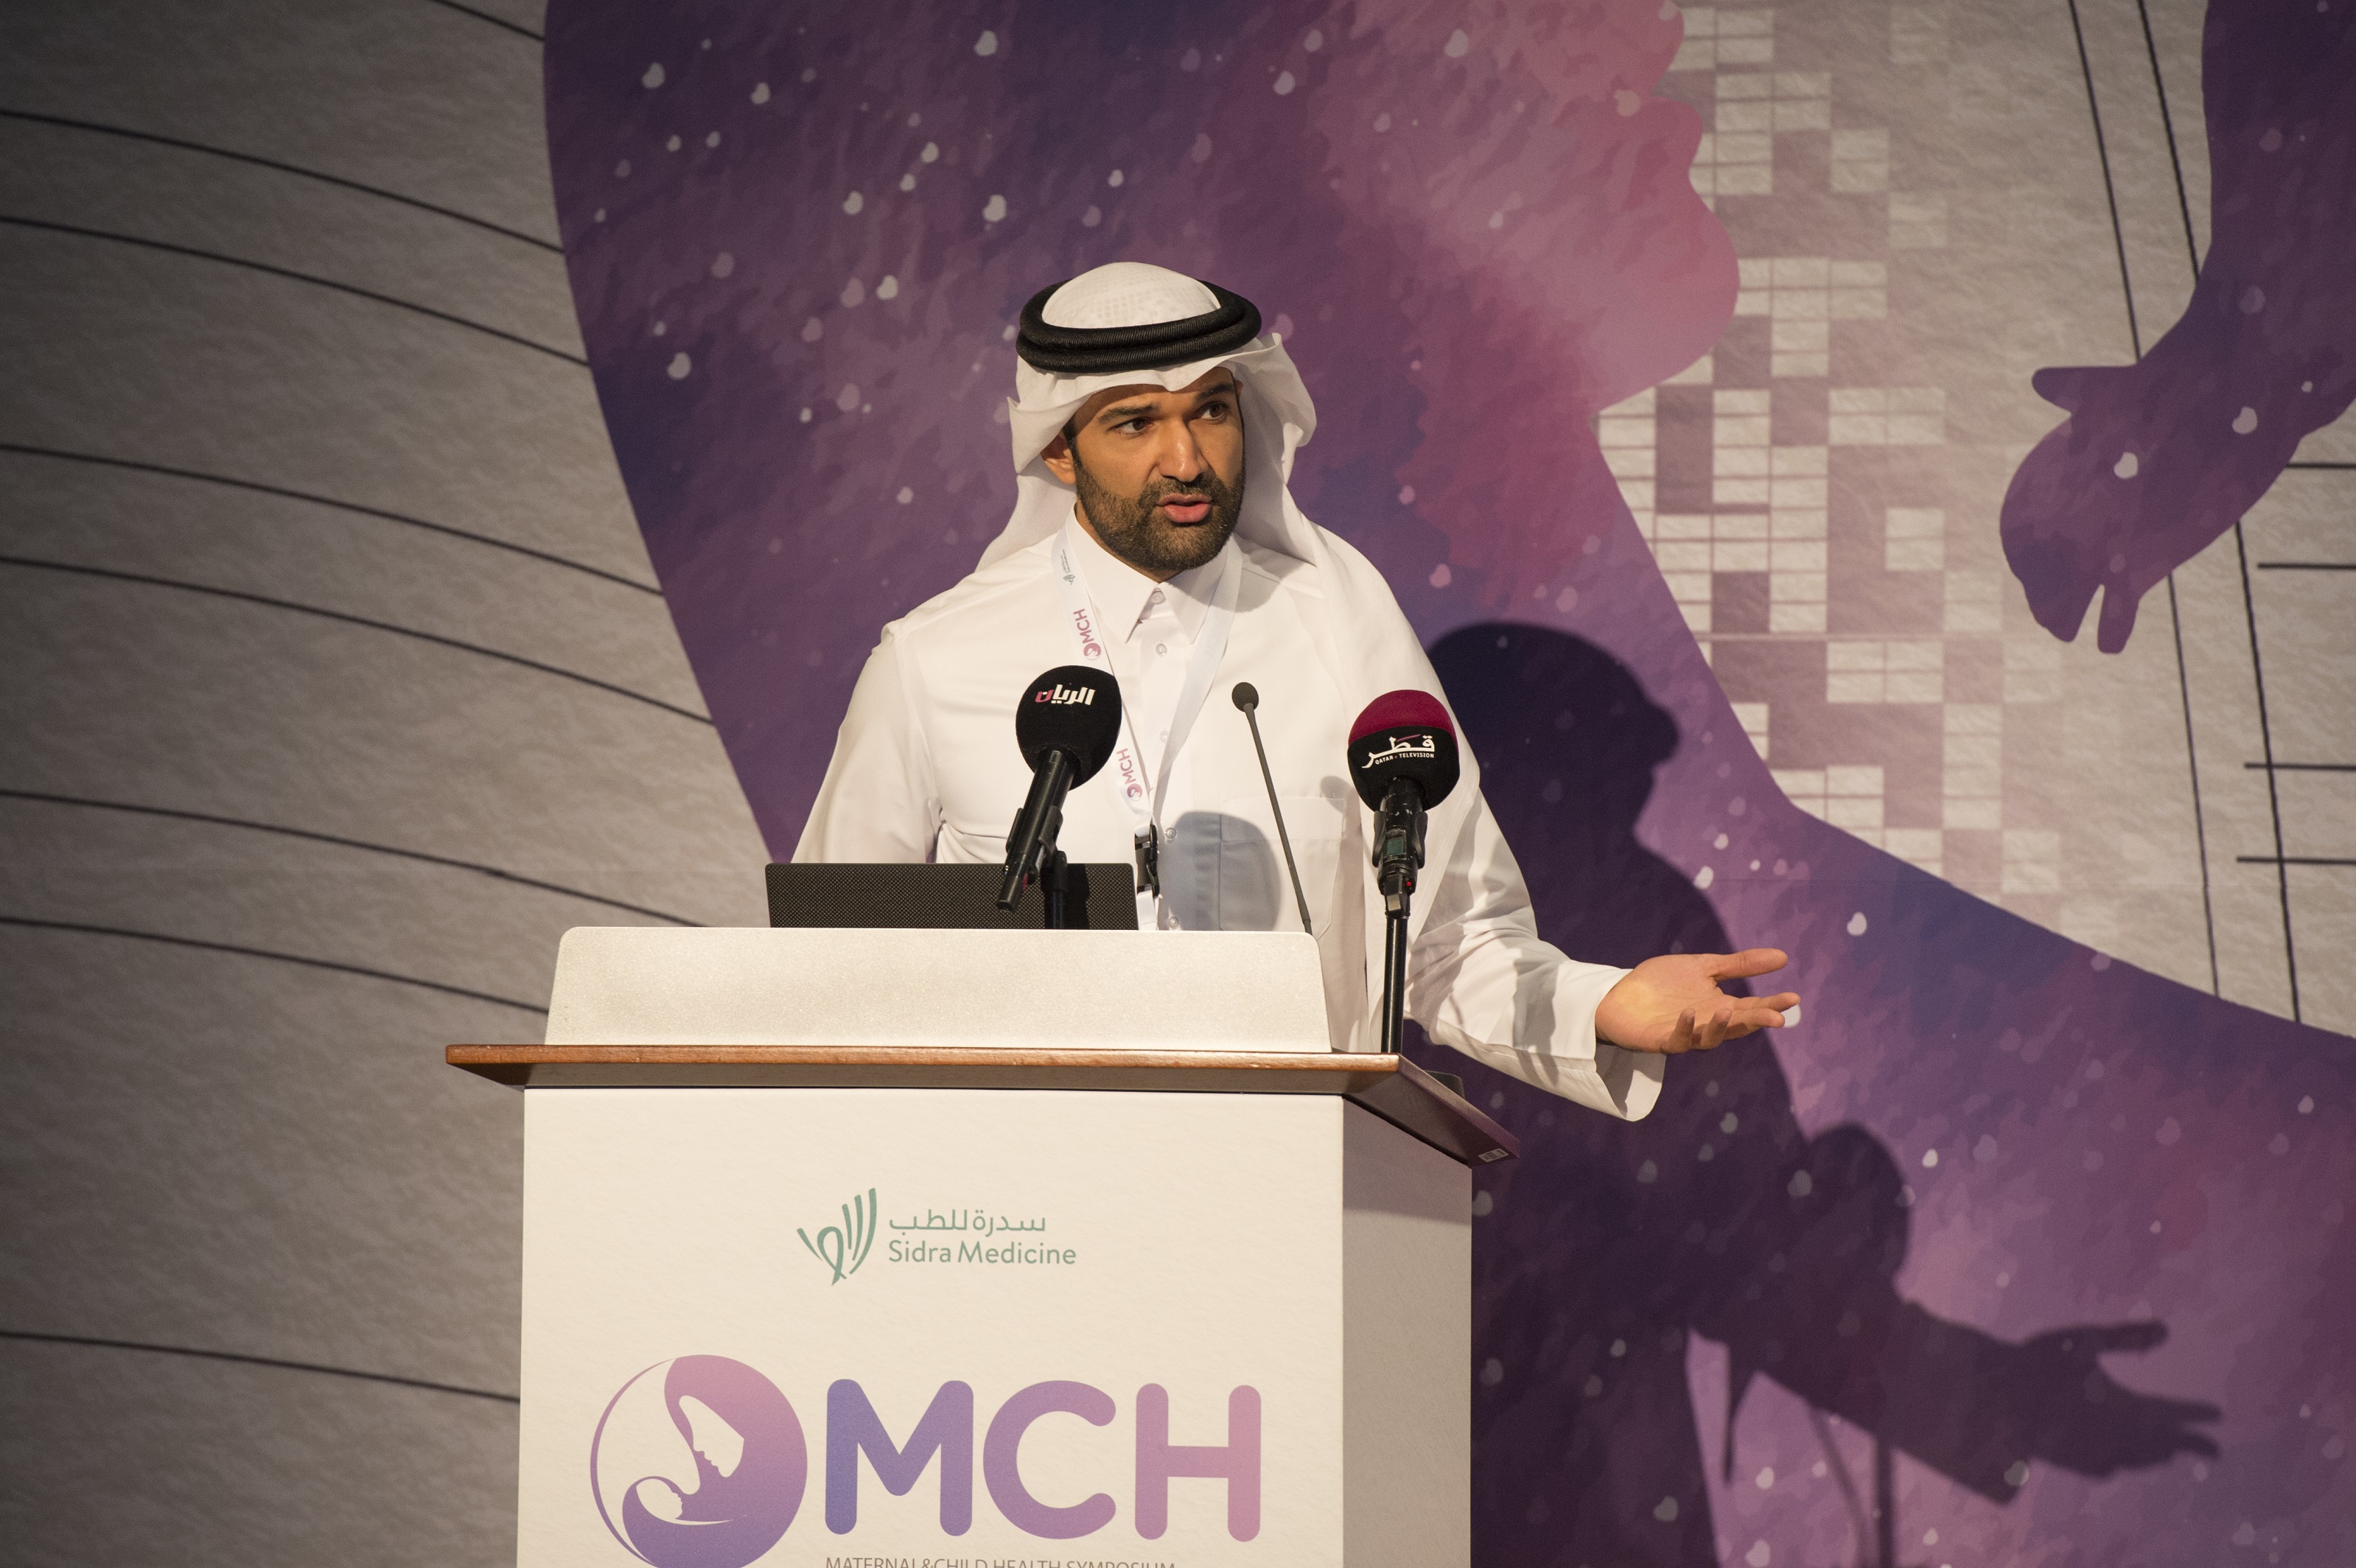 Dr. Khalid Fakhro, Sidra Medicine's Act. CRO at the closing ceremony of MCH 2020